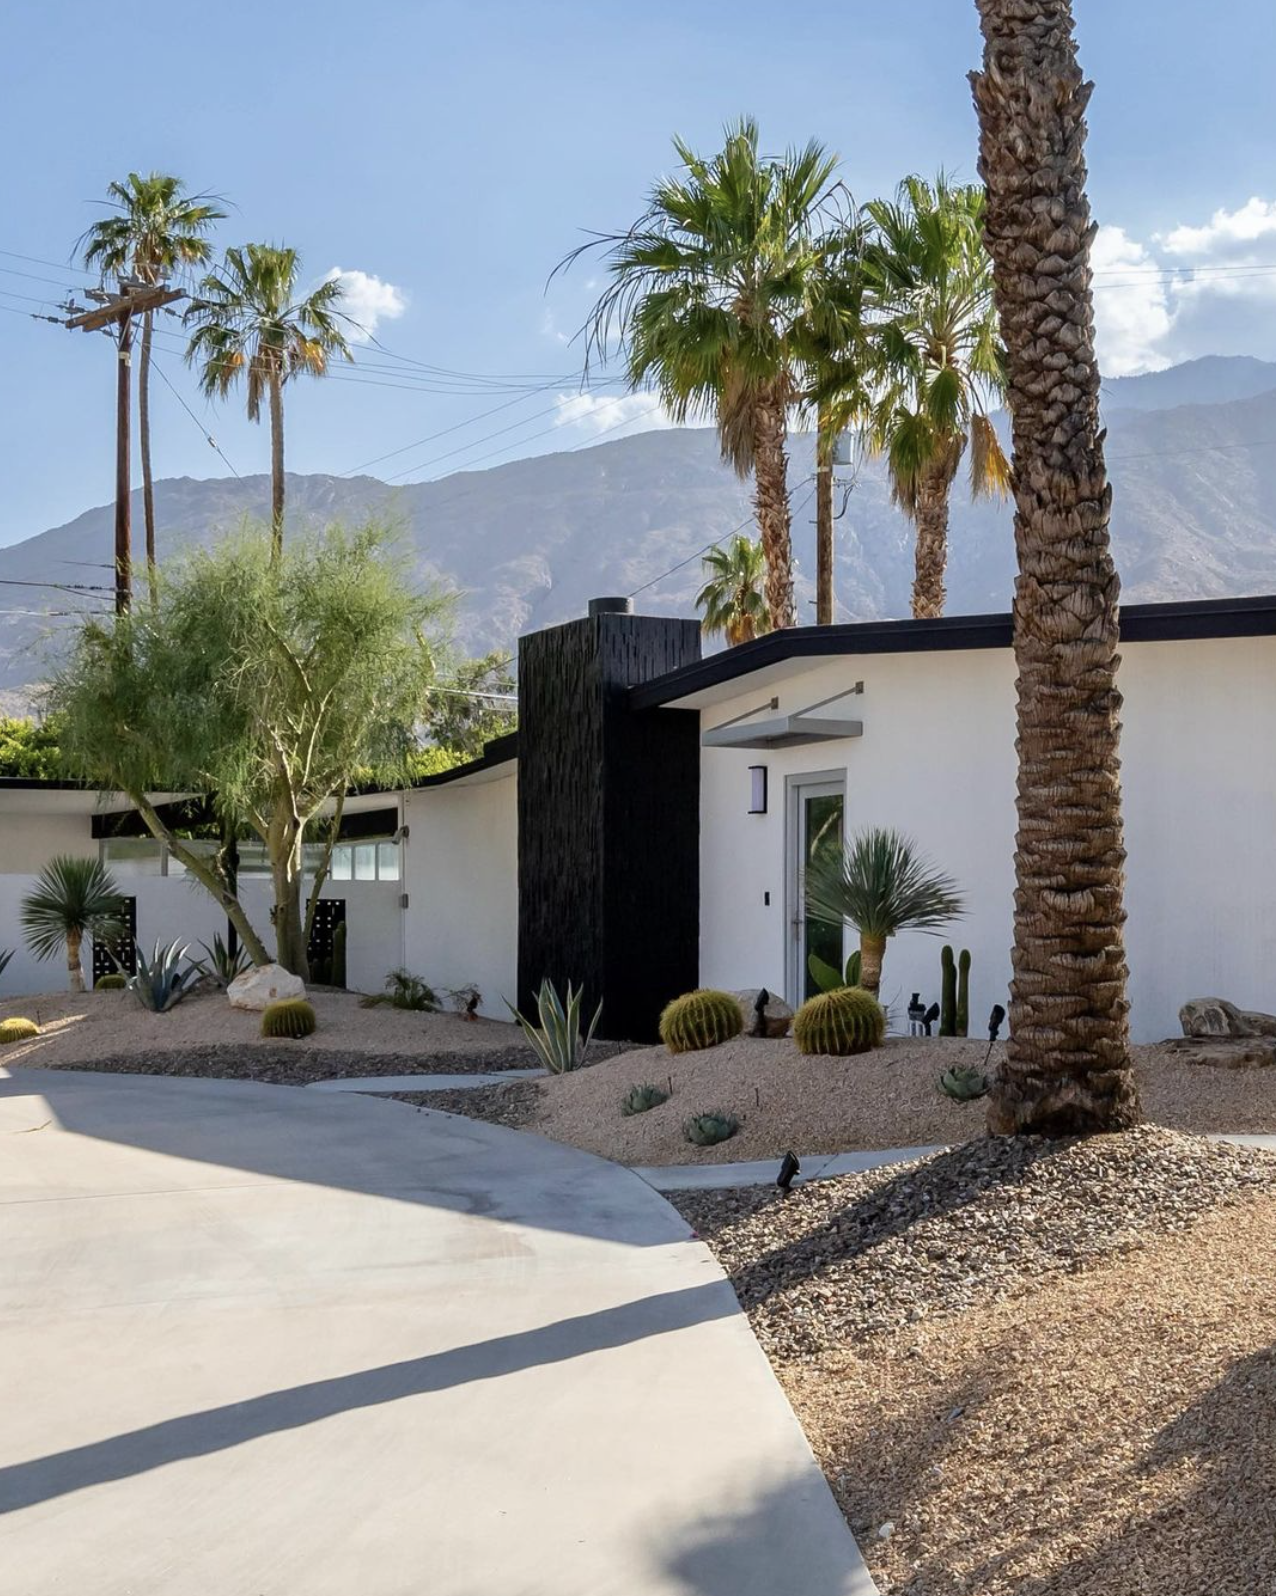 Pulp's First Vacation Rental Property Makes Its Debut in Palm Springs |  Pulp Design Studios